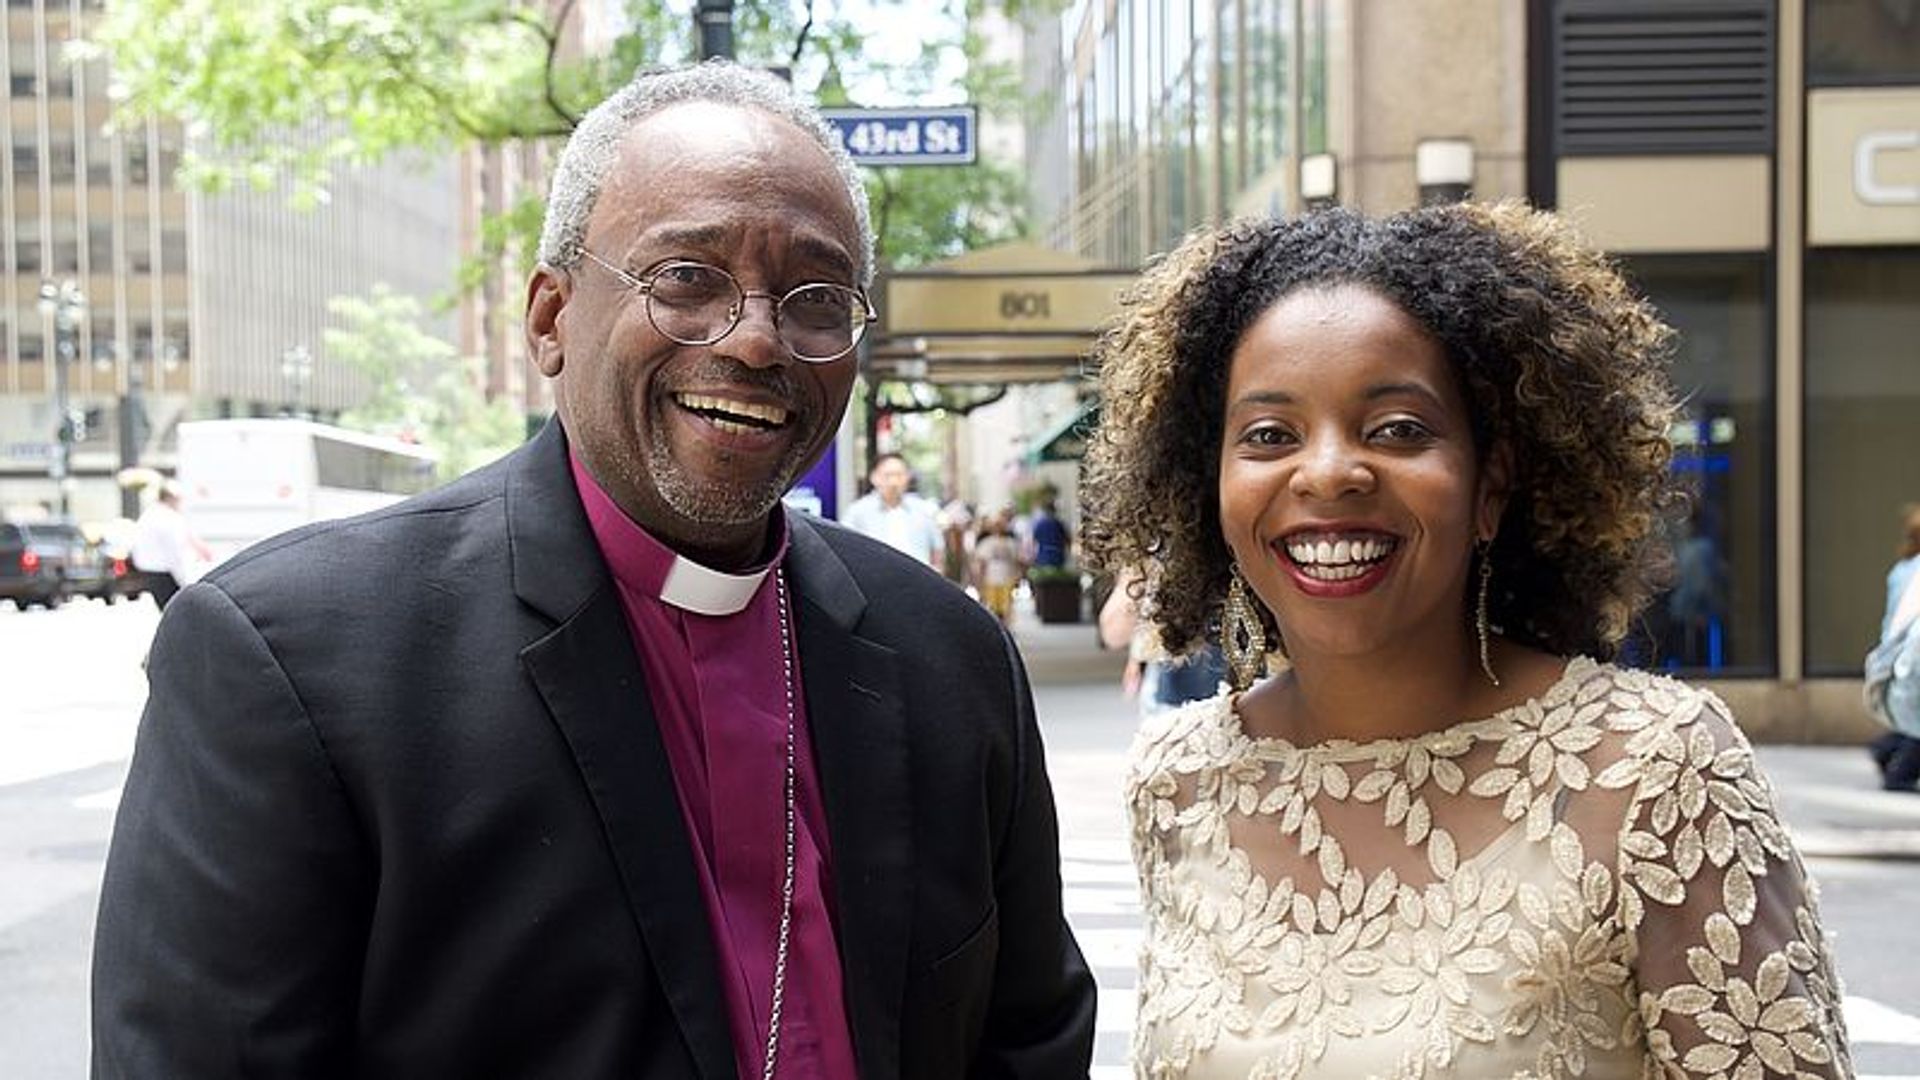 Lees ook: Michael Curry trapt EO-project 'Why Slavery?' af